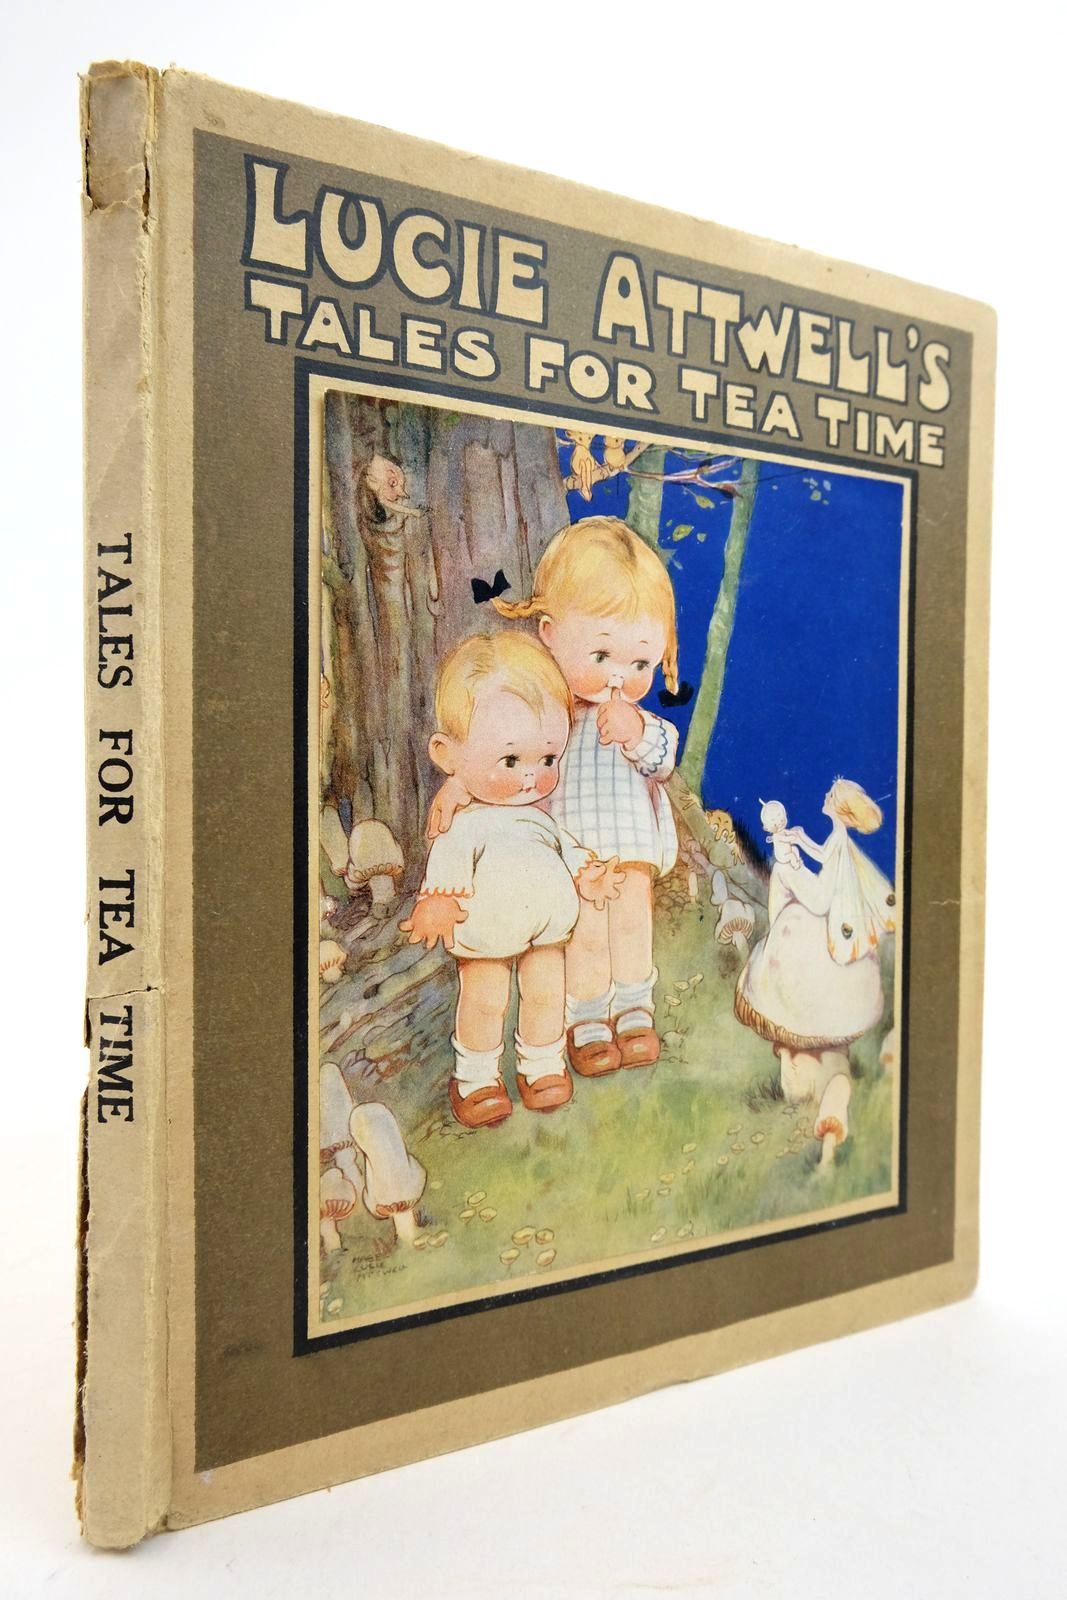 Photo of LUCIE ATTWELL'S TALES FOR TEA TIME illustrated by Attwell, Mabel Lucie published by S.W. Partridge &amp; Co. (STOCK CODE: 2140866)  for sale by Stella & Rose's Books